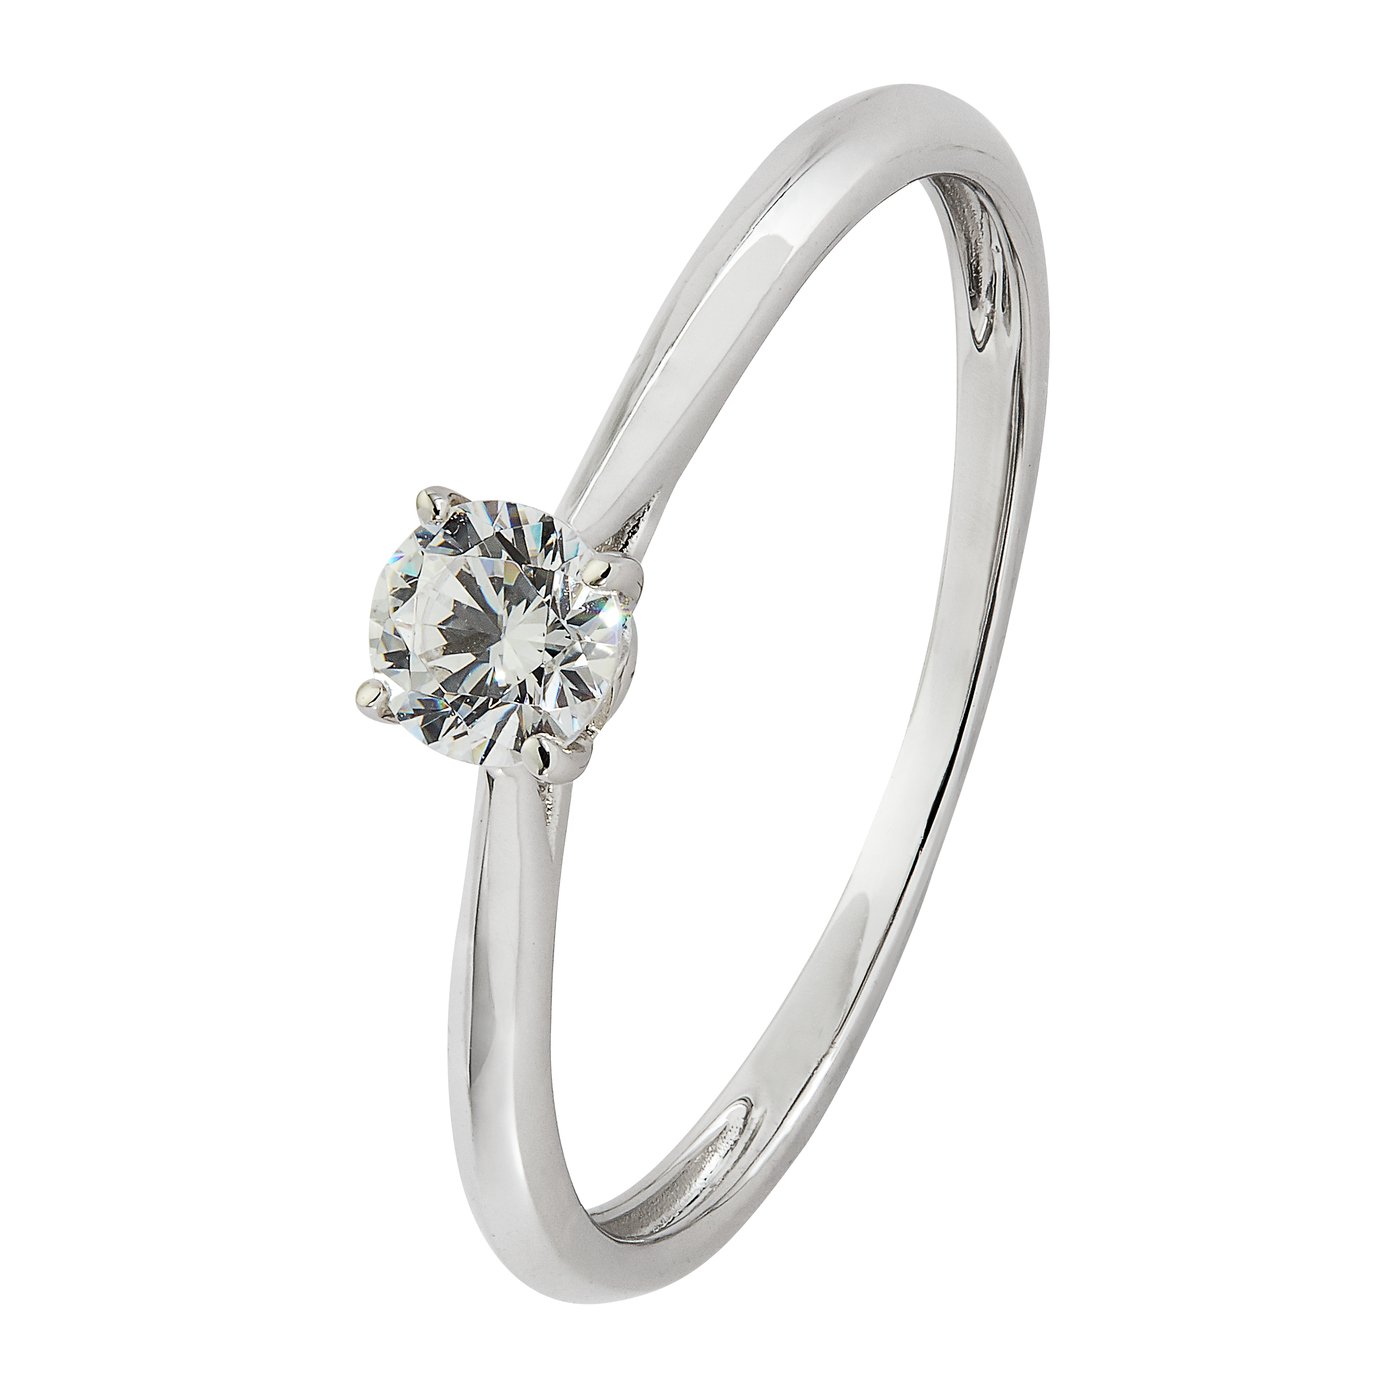 Revere 9ct White Gold Cubic Zirconia Engagement Ring - S